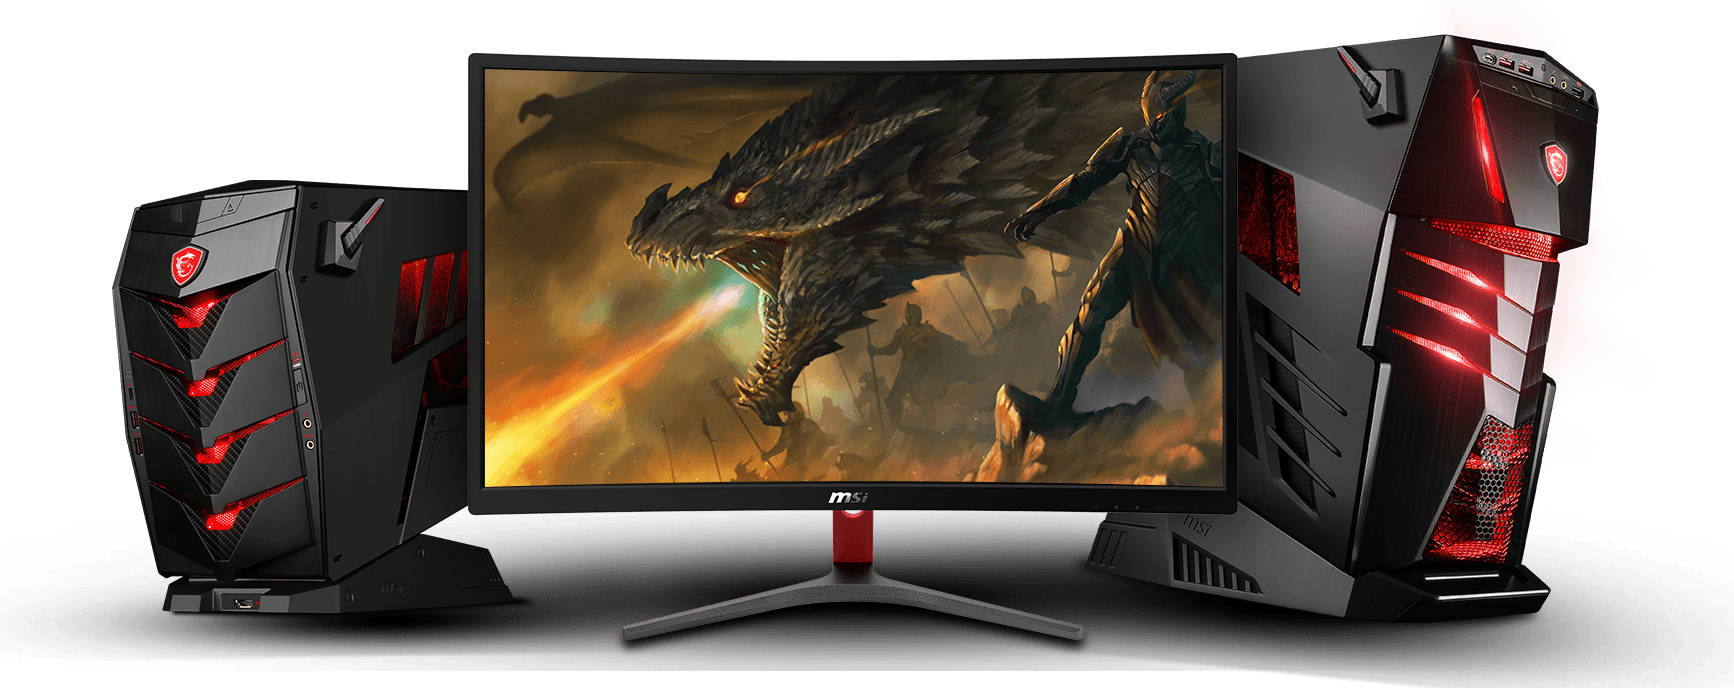 MSI OPTIX G24C 24 INCH 144HZ CURVED GAMING MONITOR – Fraggaming Store